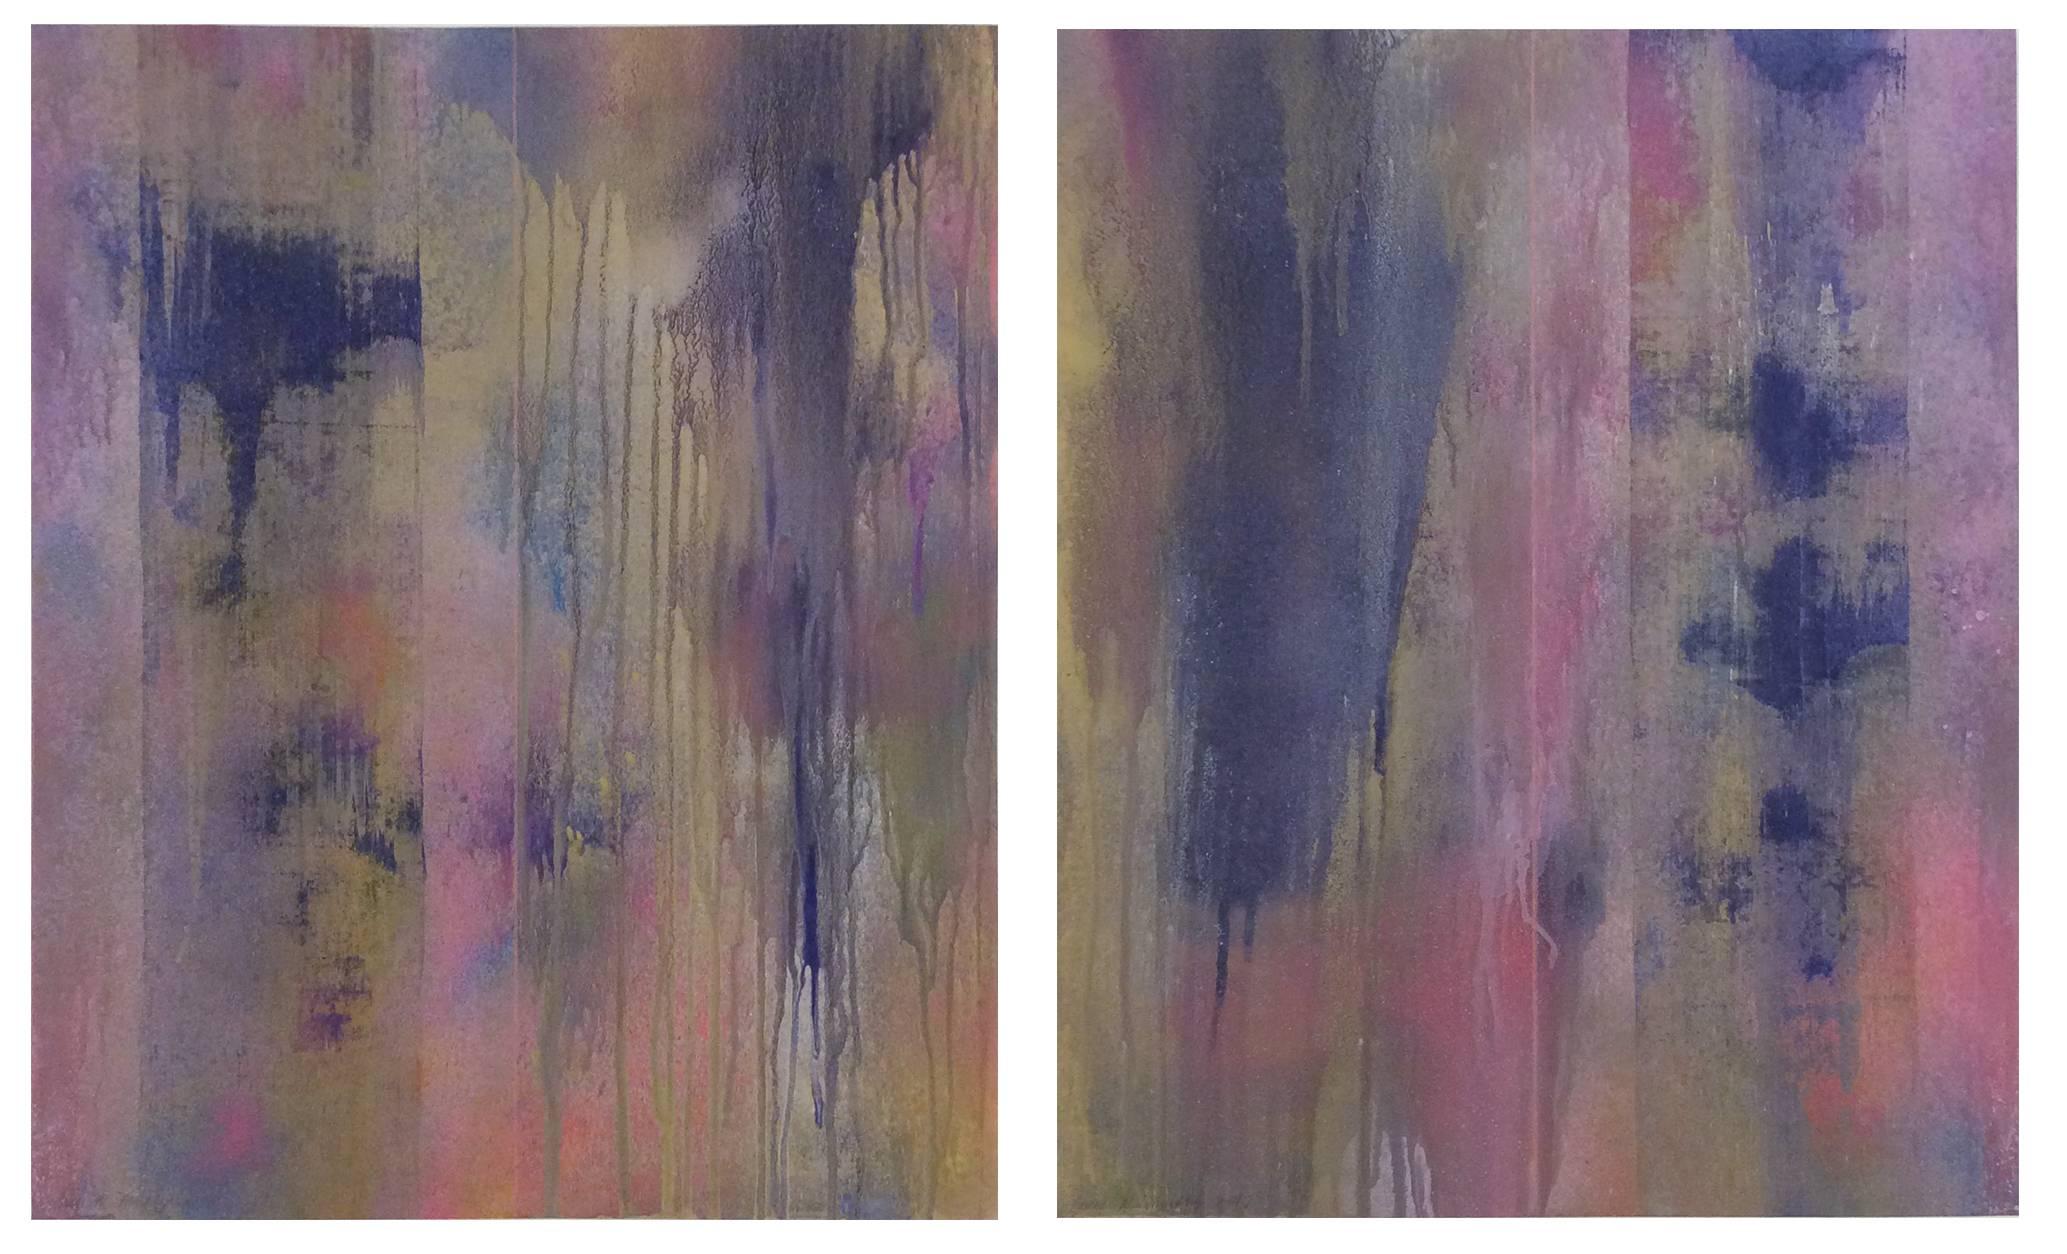 Pink Veils (Pair of Abstract Paintings on Paper with Metallic Powders)
enamel and metallic powders on Archival paper
each piece is 24 x 18 inches unframed
overall dimensions, 24 x 36 inches unframed
The option is available to frame each side